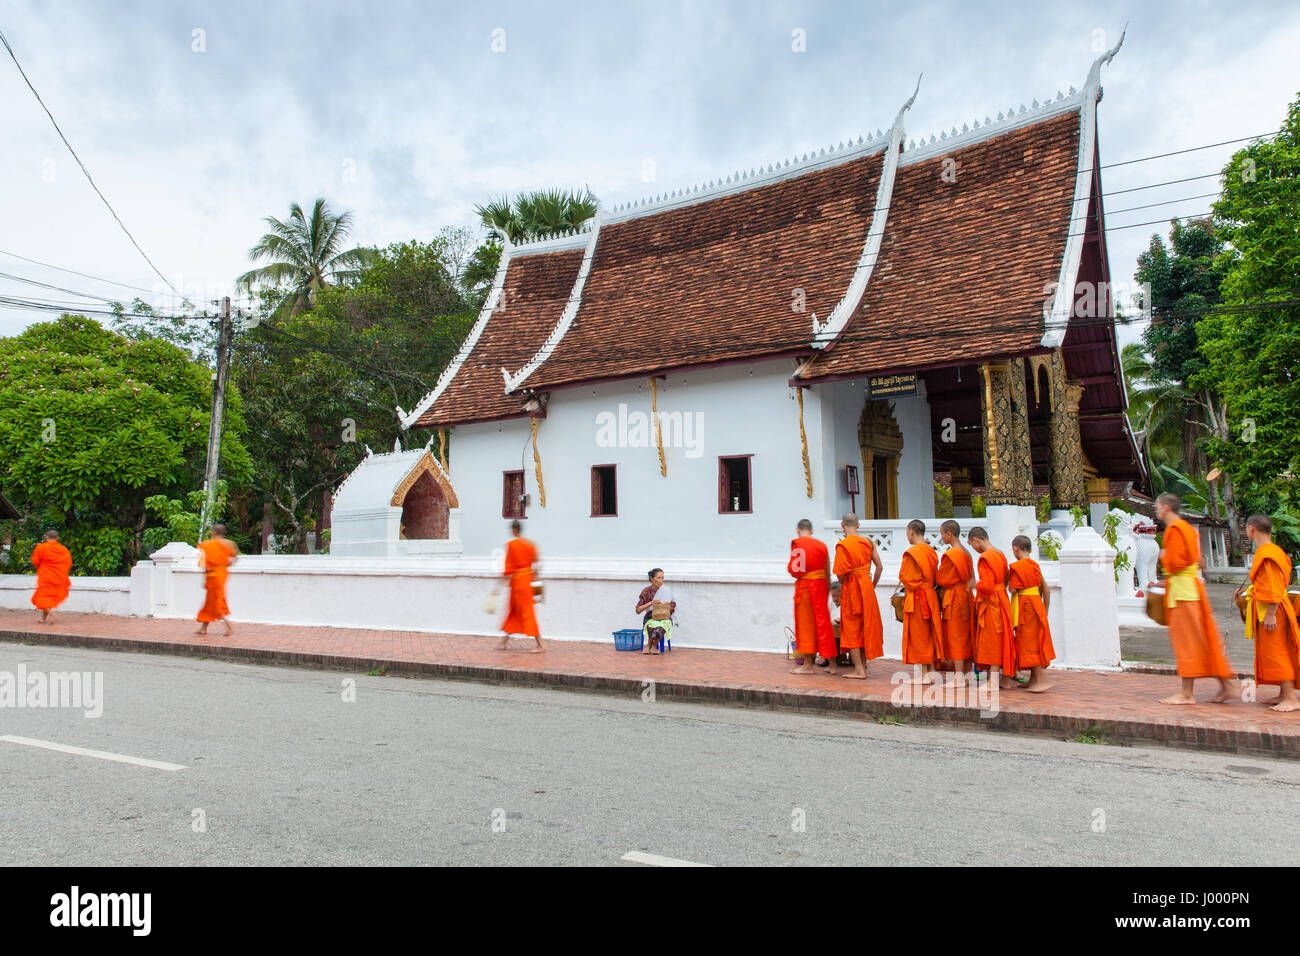 Luang Prabang, Laos - 22 June, 2014: Buddhist monks collecting alms from people on the street of Luang Prabang, Laos on 22 June, 2014. Stock Photo